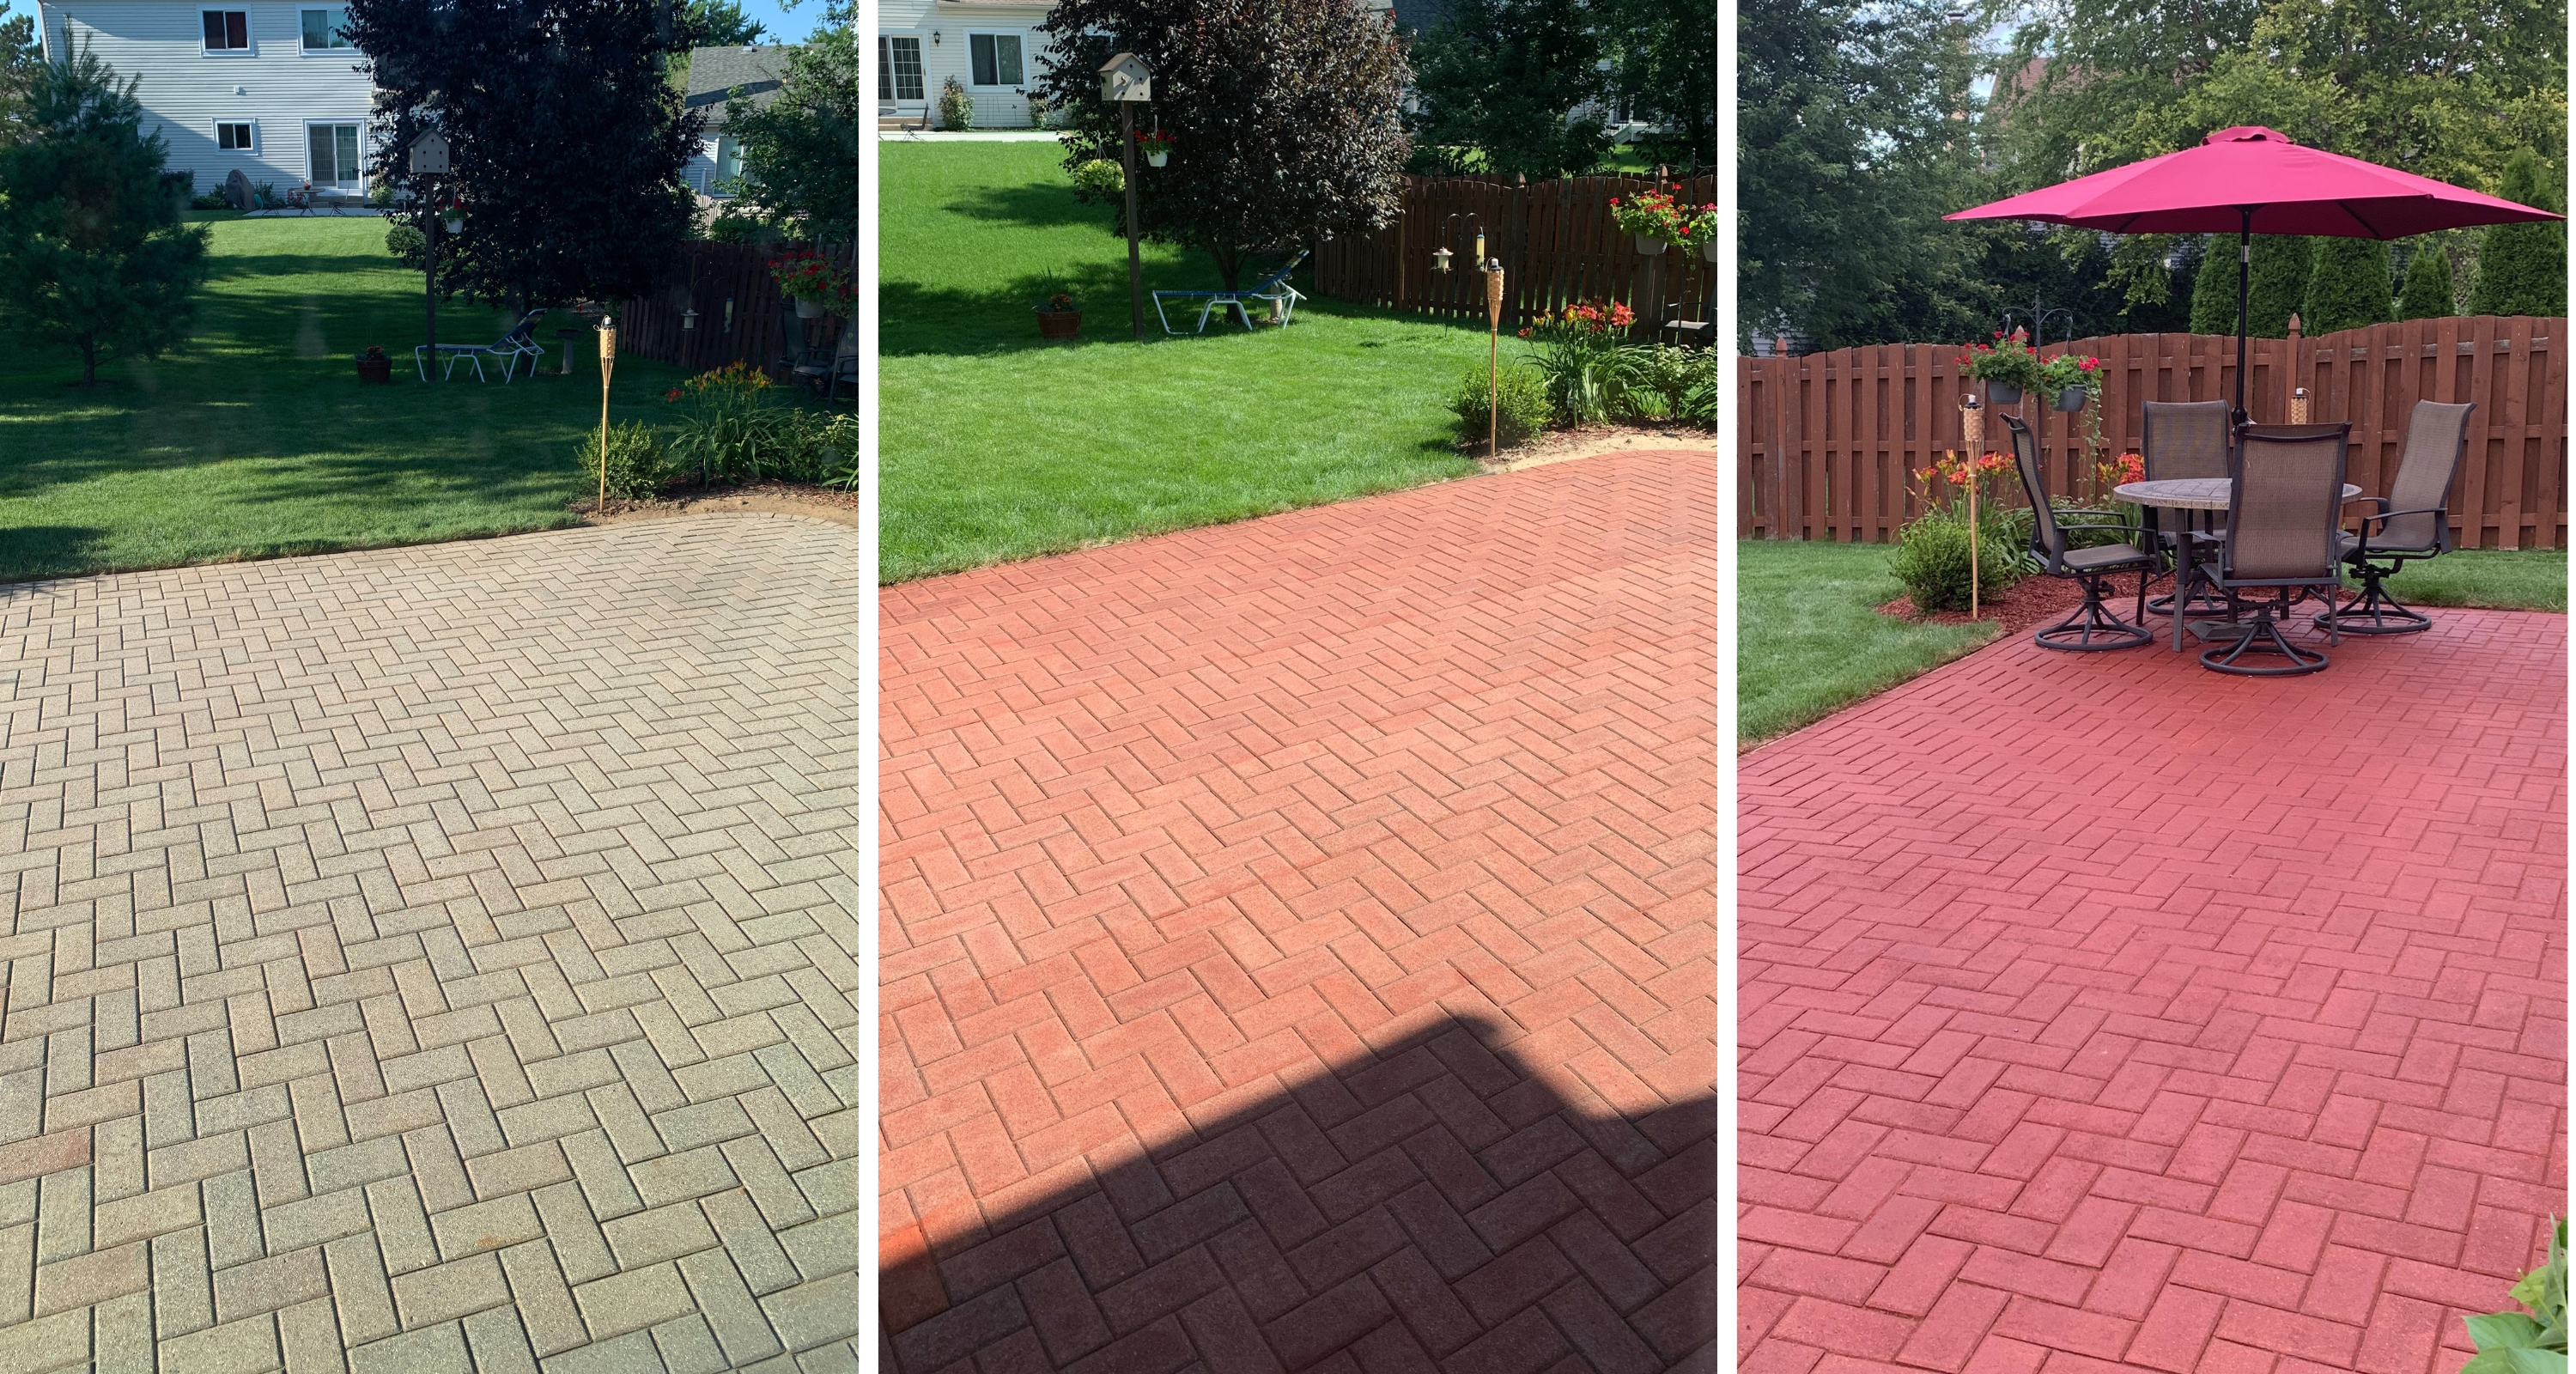 Three images showing a patio's restoration. The first photo features a patio with discolored pavers. The second photo shows the pavers mid-restoration, with a more vivid color. The third photo displays the sealed restoration with the pavers in a deep crimson, complementing outdoor furniture and greenery.